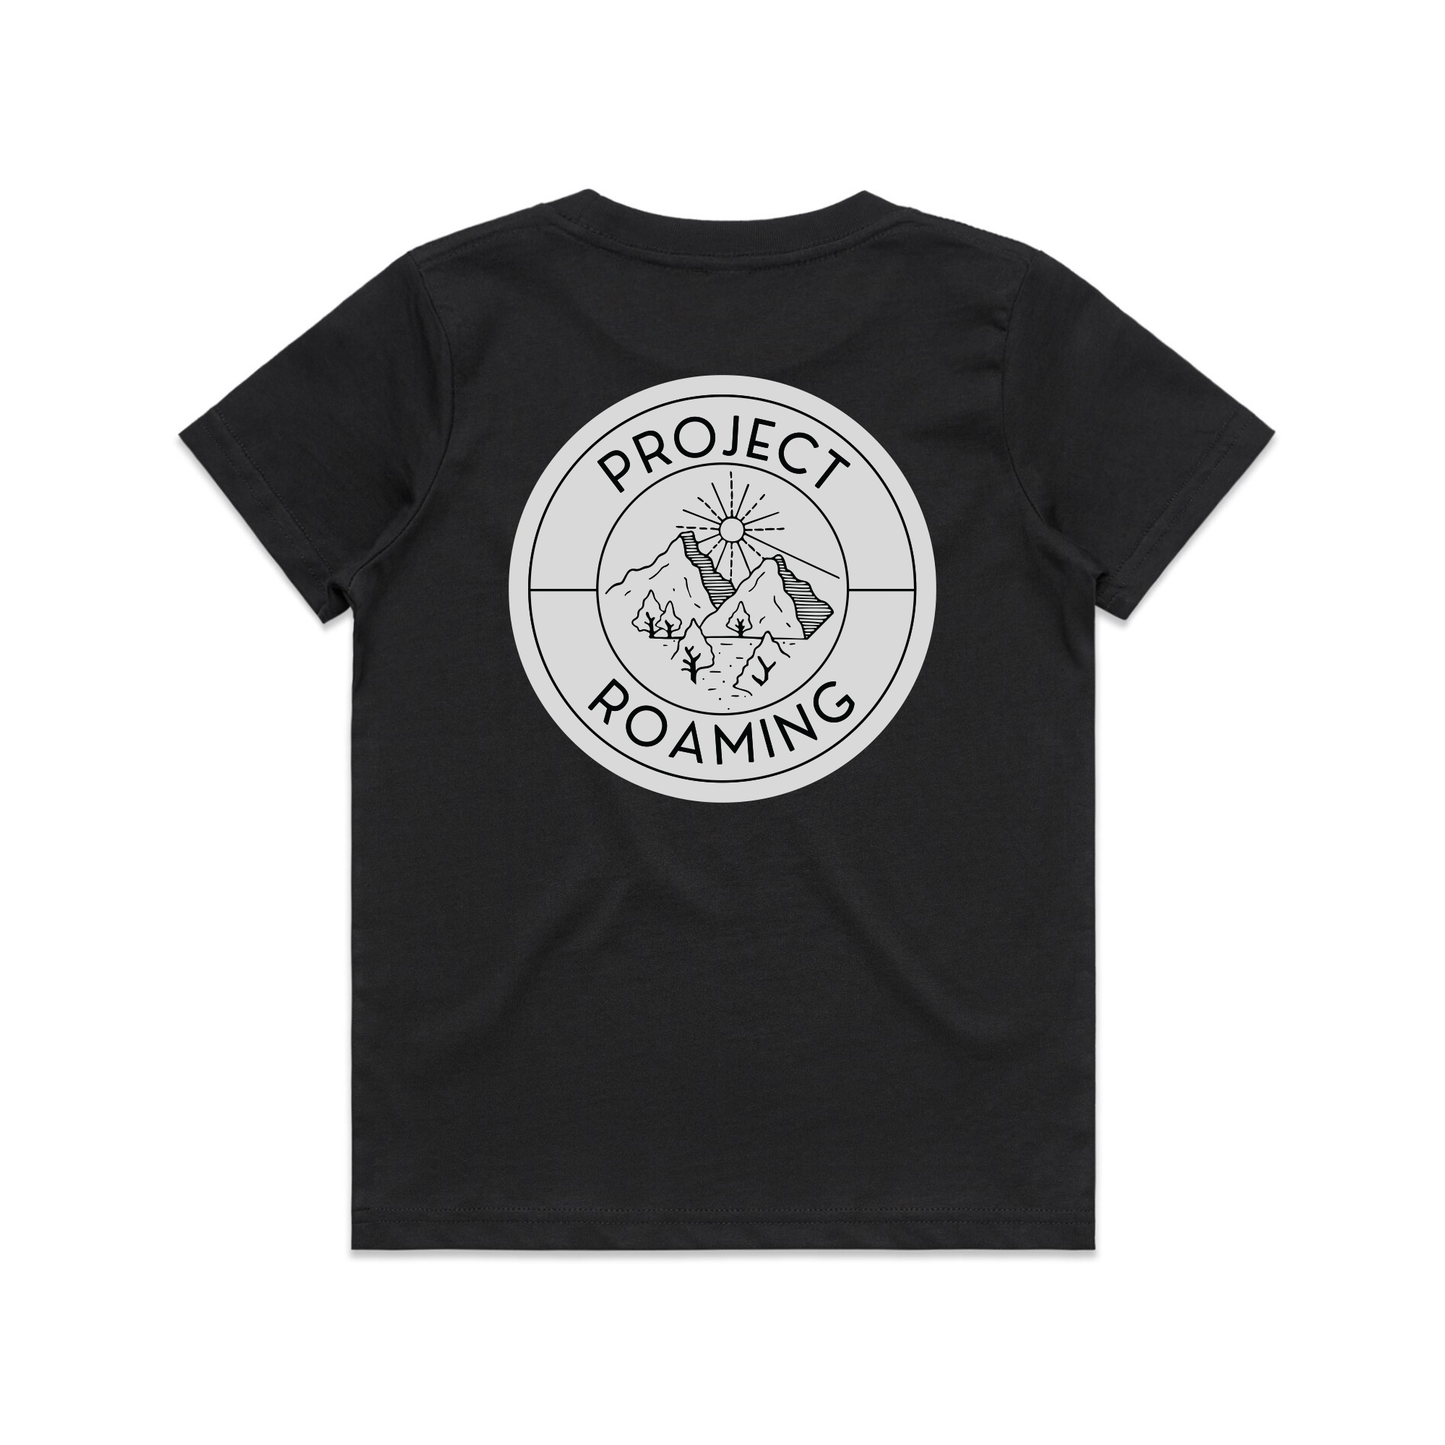 Project Roaming Youth Tee